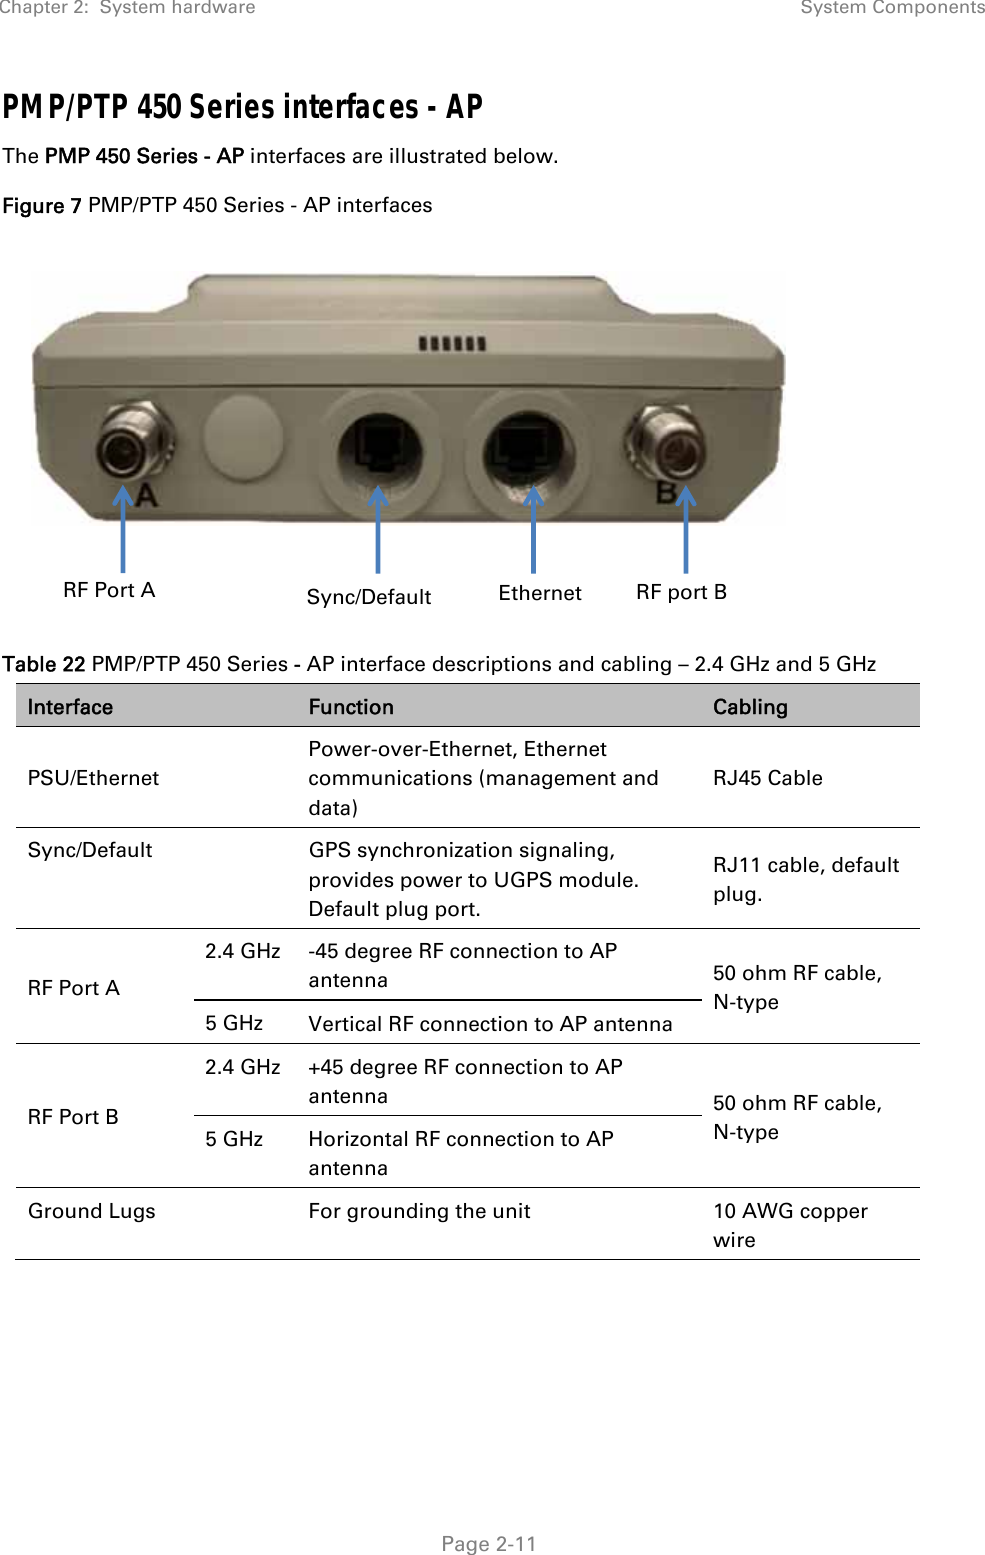 Chapter 2:  System hardware  System Components   Page 2-11 PMP/PTP 450 Series interfaces - AP The PMP 450 Series - AP interfaces are illustrated below. Figure 7 PMP/PTP 450 Series - AP interfaces    Table 22 PMP/PTP 450 Series - AP interface descriptions and cabling – 2.4 GHz and 5 GHz Interface   Function  Cabling PSU/Ethernet  Power-over-Ethernet, Ethernet communications (management and data) RJ45 Cable Sync/Default    GPS synchronization signaling, provides power to UGPS module.  Default plug port. RJ11 cable, default plug. RF Port A 2.4 GHz  -45 degree RF connection to AP antenna  50 ohm RF cable, N-type 5 GHz  Vertical RF connection to AP antenna RF Port B 2.4 GHz  +45 degree RF connection to AP antenna  50 ohm RF cable, N-type 5 GHz  Horizontal RF connection to AP antenna Ground Lugs     For grounding the unit  10 AWG copper wire RF Port A  Sync/Default  Ethernet  RF port B 